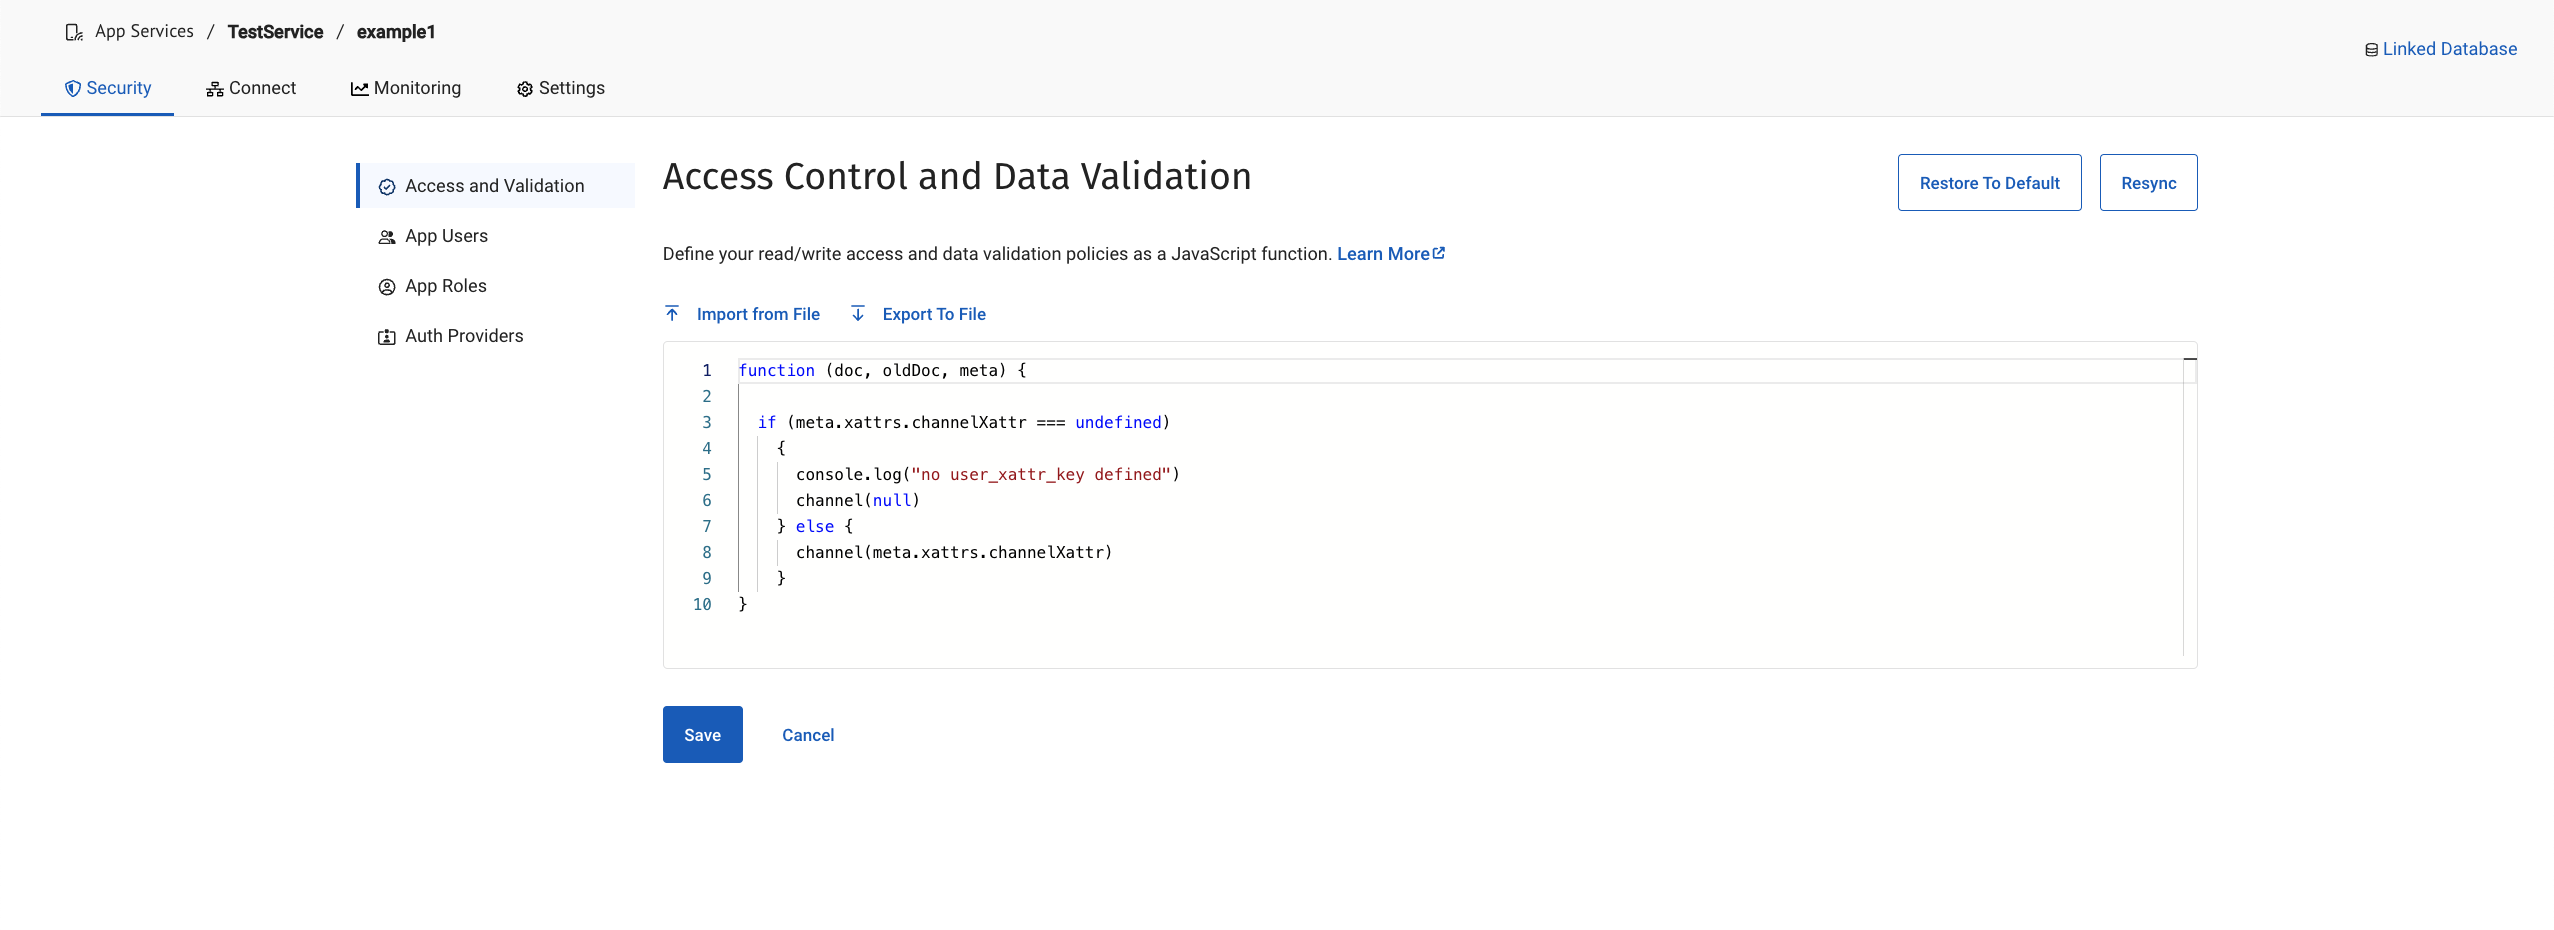 Updating the Access Control and Data Validation function